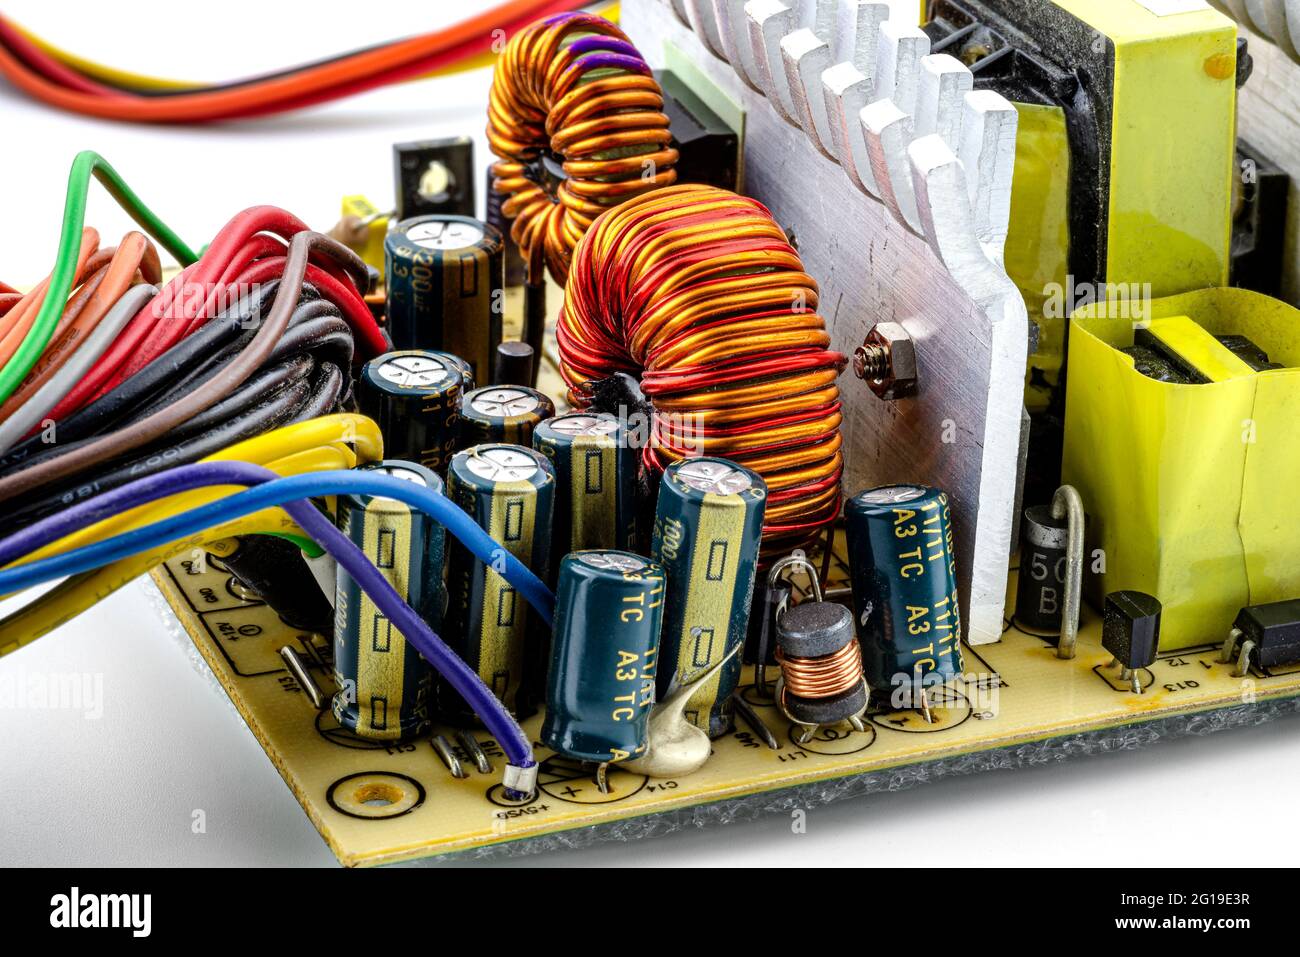 Induction coil, toroidal coil on a ring with visible copper helix and capacitors, mounted on a printed circuit board in a computer power supply. Stock Photo